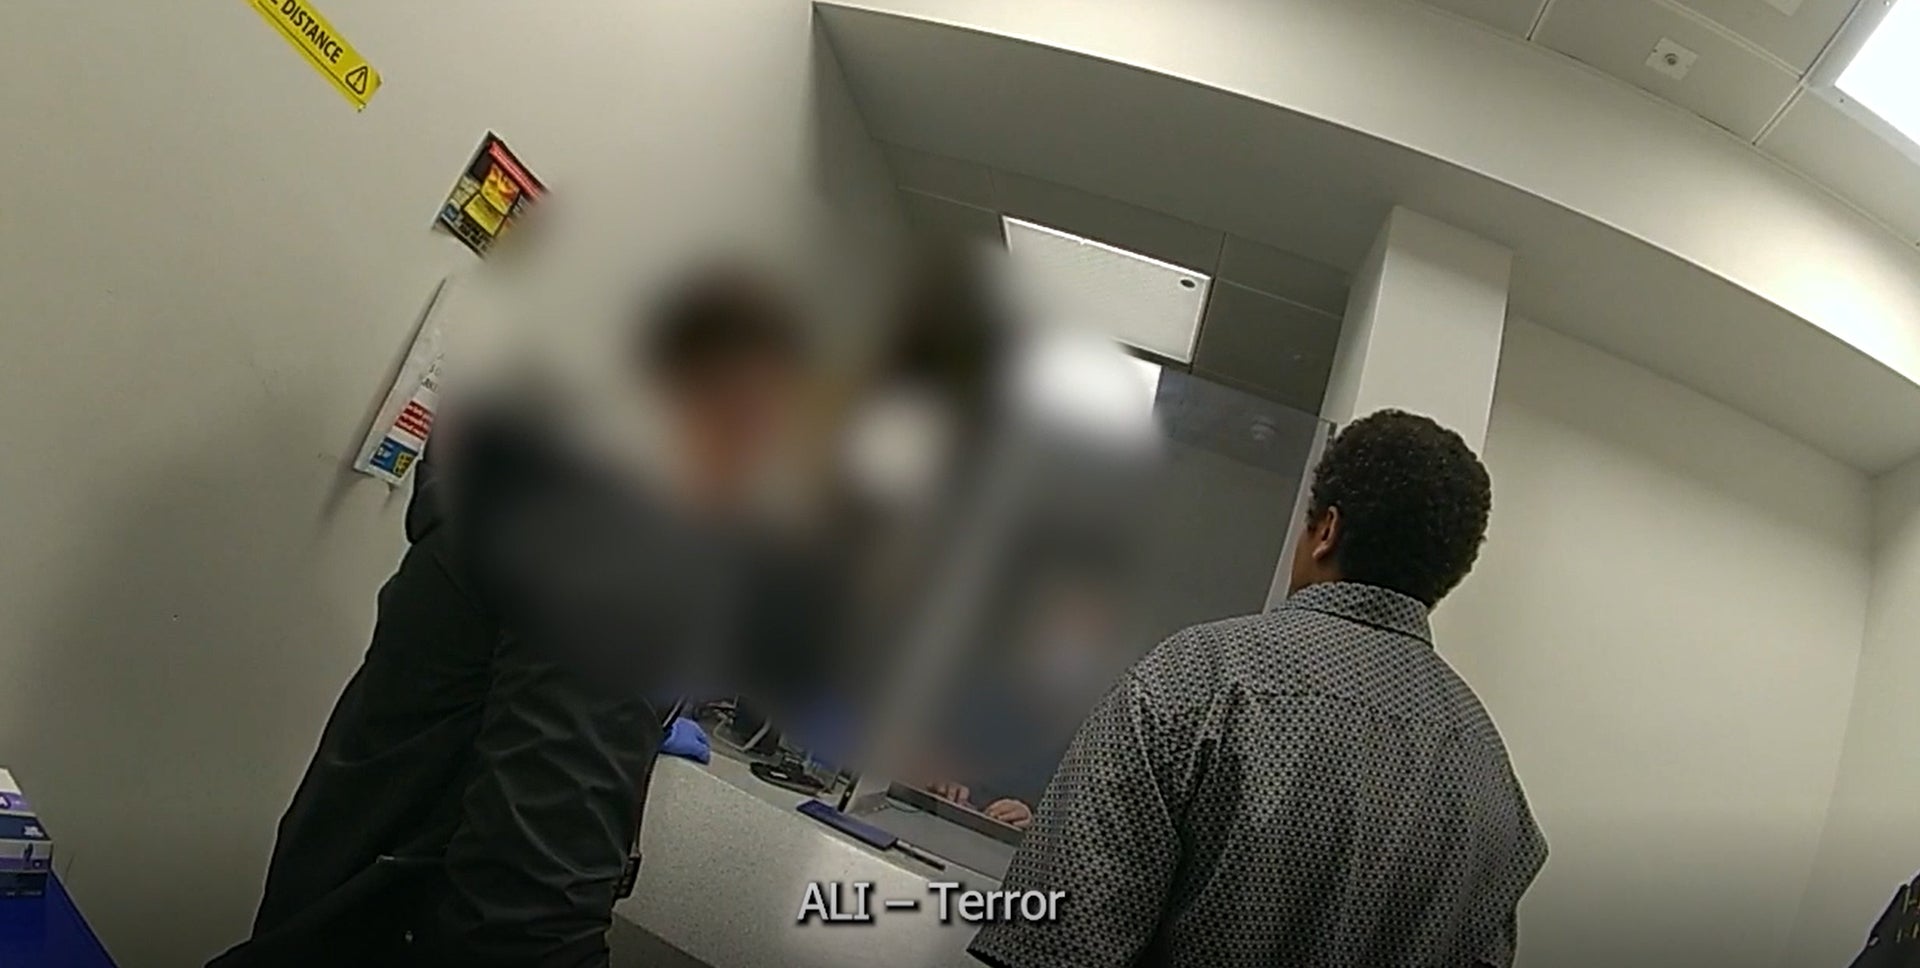 Screengrab taken from body worn video footage showing Ali Harbi Ali being booked into custody when he says the offence is ‘terror’ related